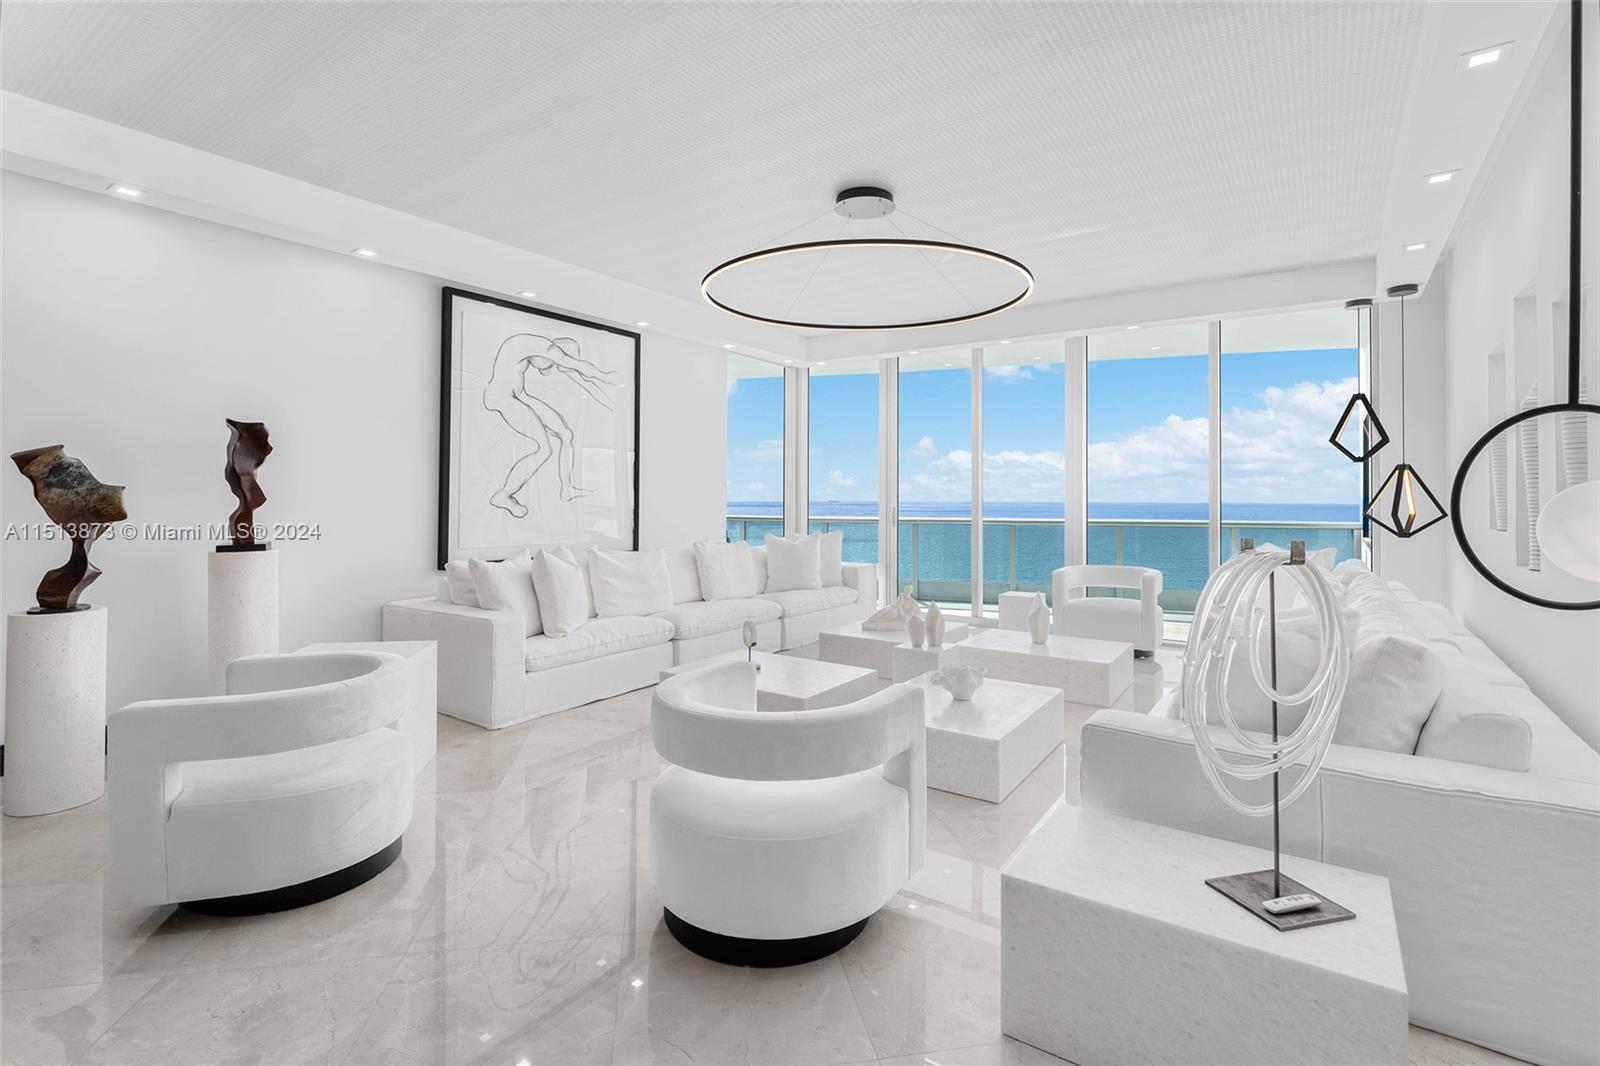 Located at the exclusive Bath Club, this immaculately designed oceanfront unit exemplifies luxury living w/meticulous attention to every design detail. The unit boasts private elevator entry, 3,640 SF, an oceanside terrace, plus second terrace with bay/city views, Jerusalem limestone floors, custom wallpapers & millwork, built-in sound system & custom lighting. Features 3BR/4+1BA, plus an office that can be easily converted to a 4th BR. Expansive living and dining room layout, media room w/Bang & Olufsen sound system & sleek gourmet kitchen w/top-of-the-line Miele & Sub-Zero appliances. The sumptuous Oceanside principal suite offers dual walk-in closets, direct terrace access & spa-inspired bathroom. Large guest room & staff quarter with en-suite baths. Enjoy 5-star amenities.